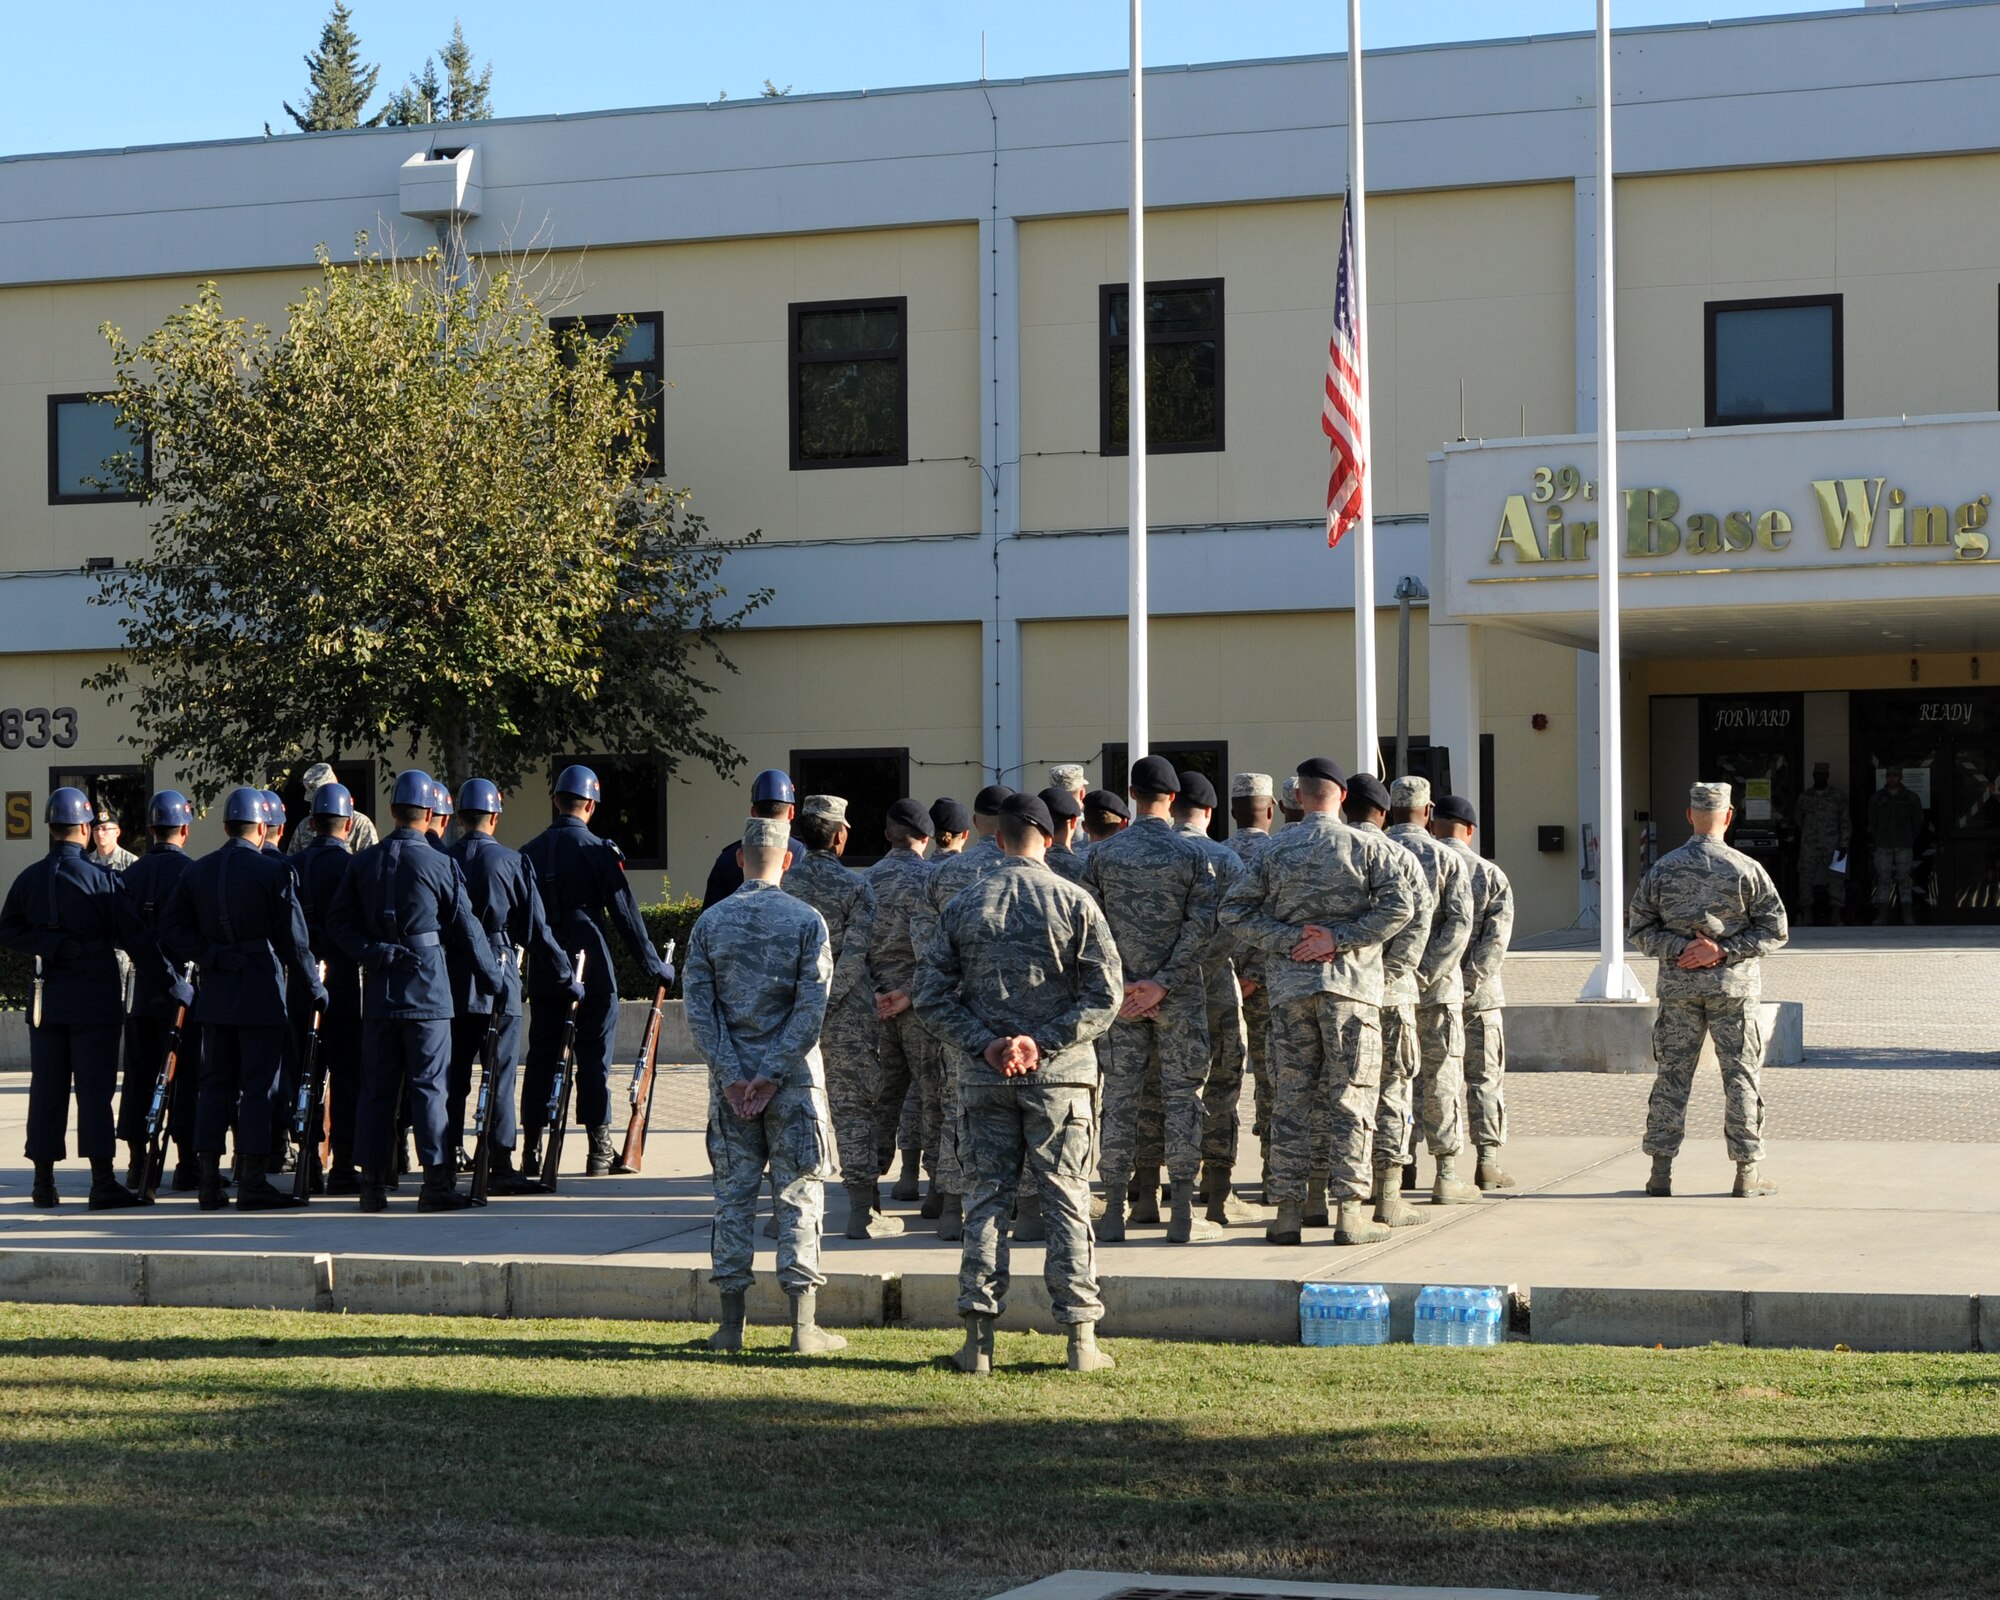 Turkish and U.S. Airmen join together in a Veterans Day ceremony Nov. 11, 2015, at Incirlik Air Base, Turkey. Veterans Day is a U.S. federal holiday to honor America’s veterans for their patriotism, love of country and willingness to serve and sacrifice for the common good. (U.S. Air Force photo by Airman 1st Class Daniel Lile/Released)